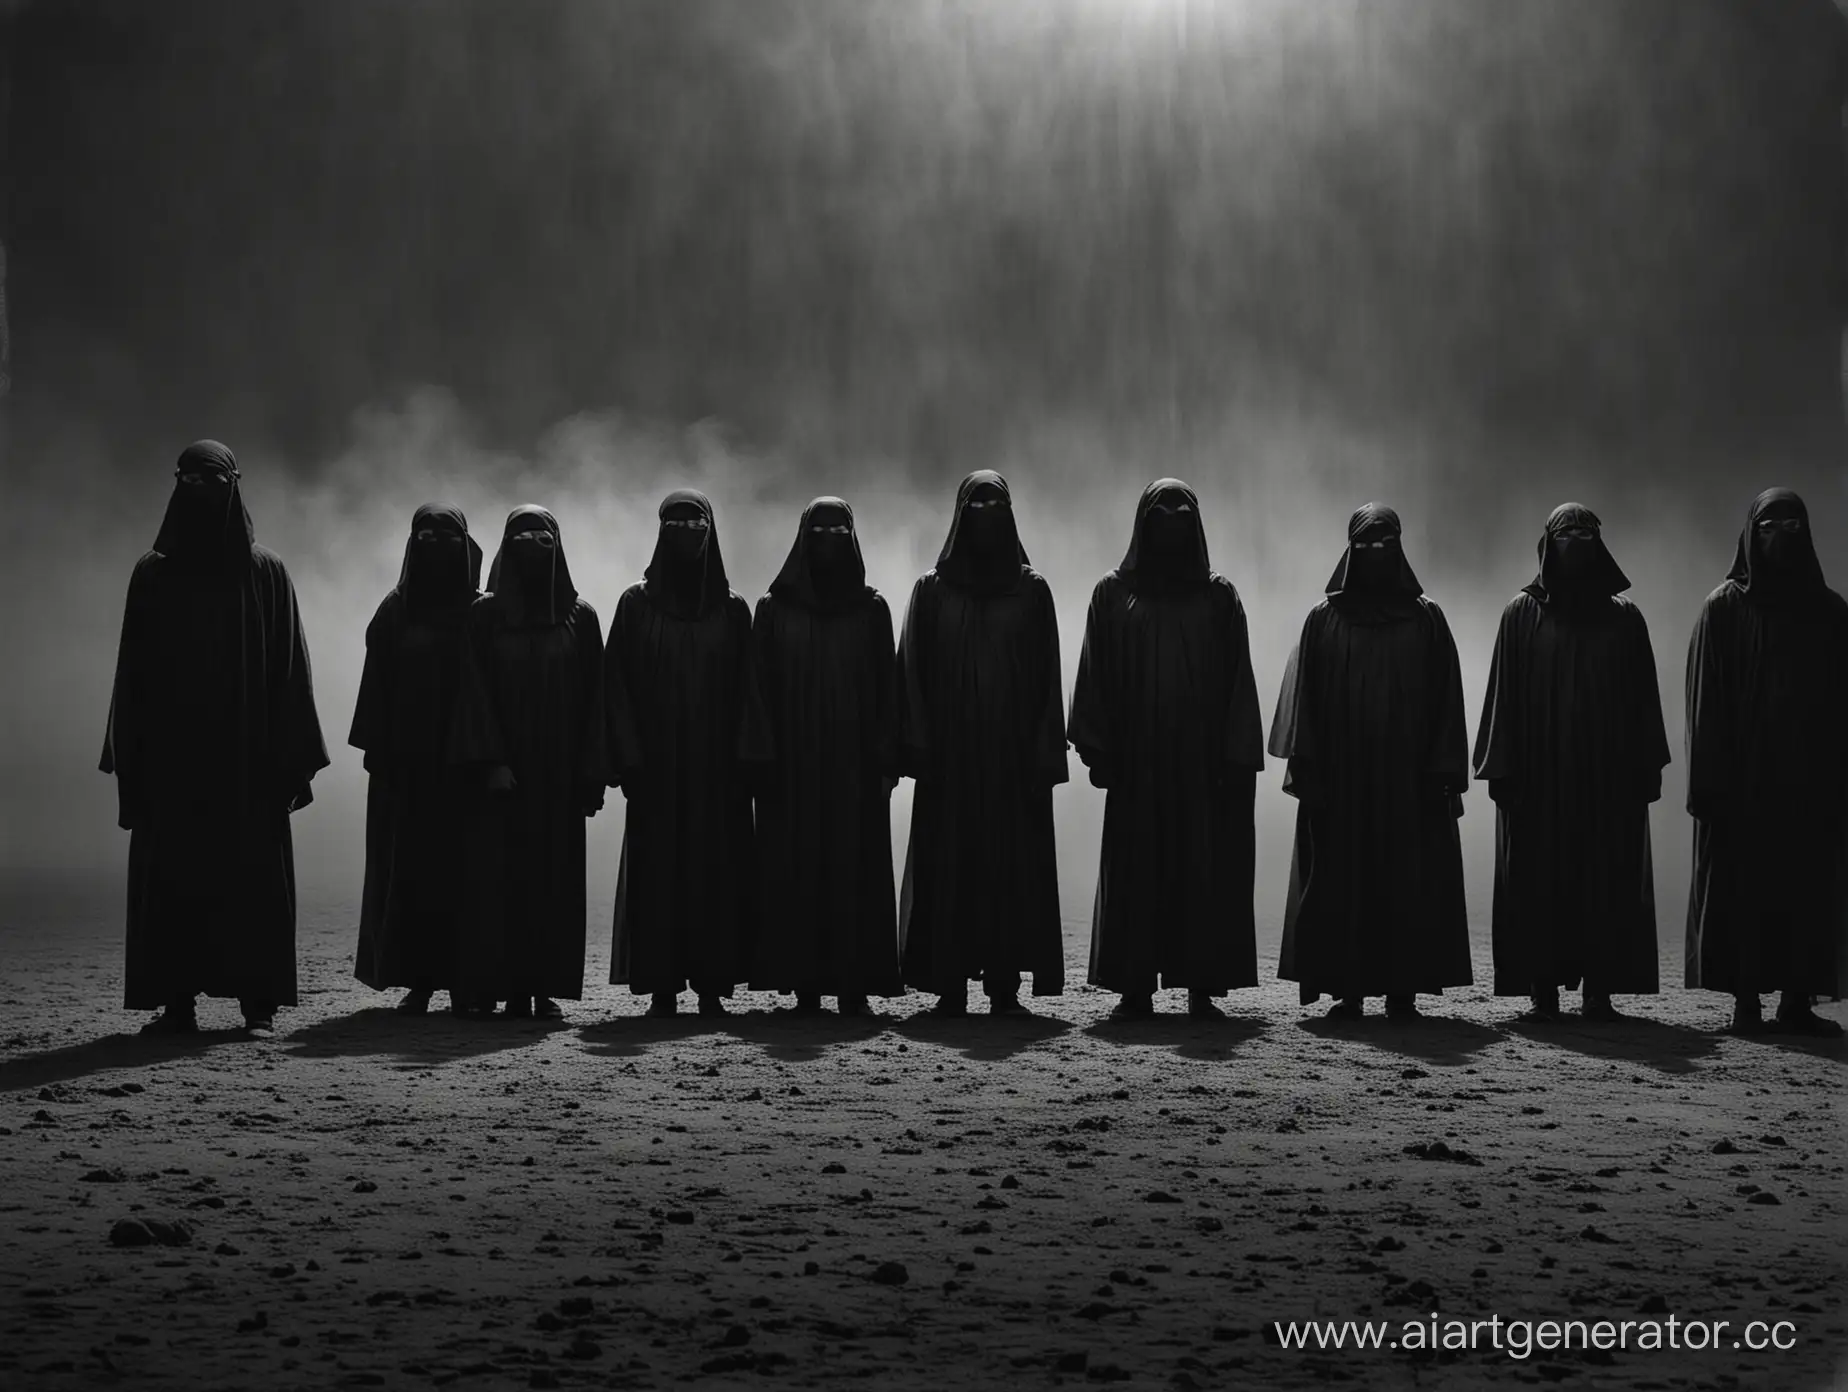 A group of people standing in a dark and blurry background, all clad in long, flowing black robes. Their faces are concealed behind featureless black masks that cover their entire head, leaving even their eyes unvisible. The robes and masks give off an air of secrecy and anonymity, as if these individuals belong to a clandestine order. The lighting is dim and eerie, casting long shadows across the scene, further obscuring any identifying features. The group stands in a loose formation, as if they are awaiting instructions or deliberating on some important matter. The tension is palpable, as each person seems to be carefully observing the others, their unseeing eyes darting about beneath the masks. The image evokes a sense of mystery and foreboding, leaving the viewer to wonder what sinister secrets these individuals might be hiding behind their enigmatic masks.